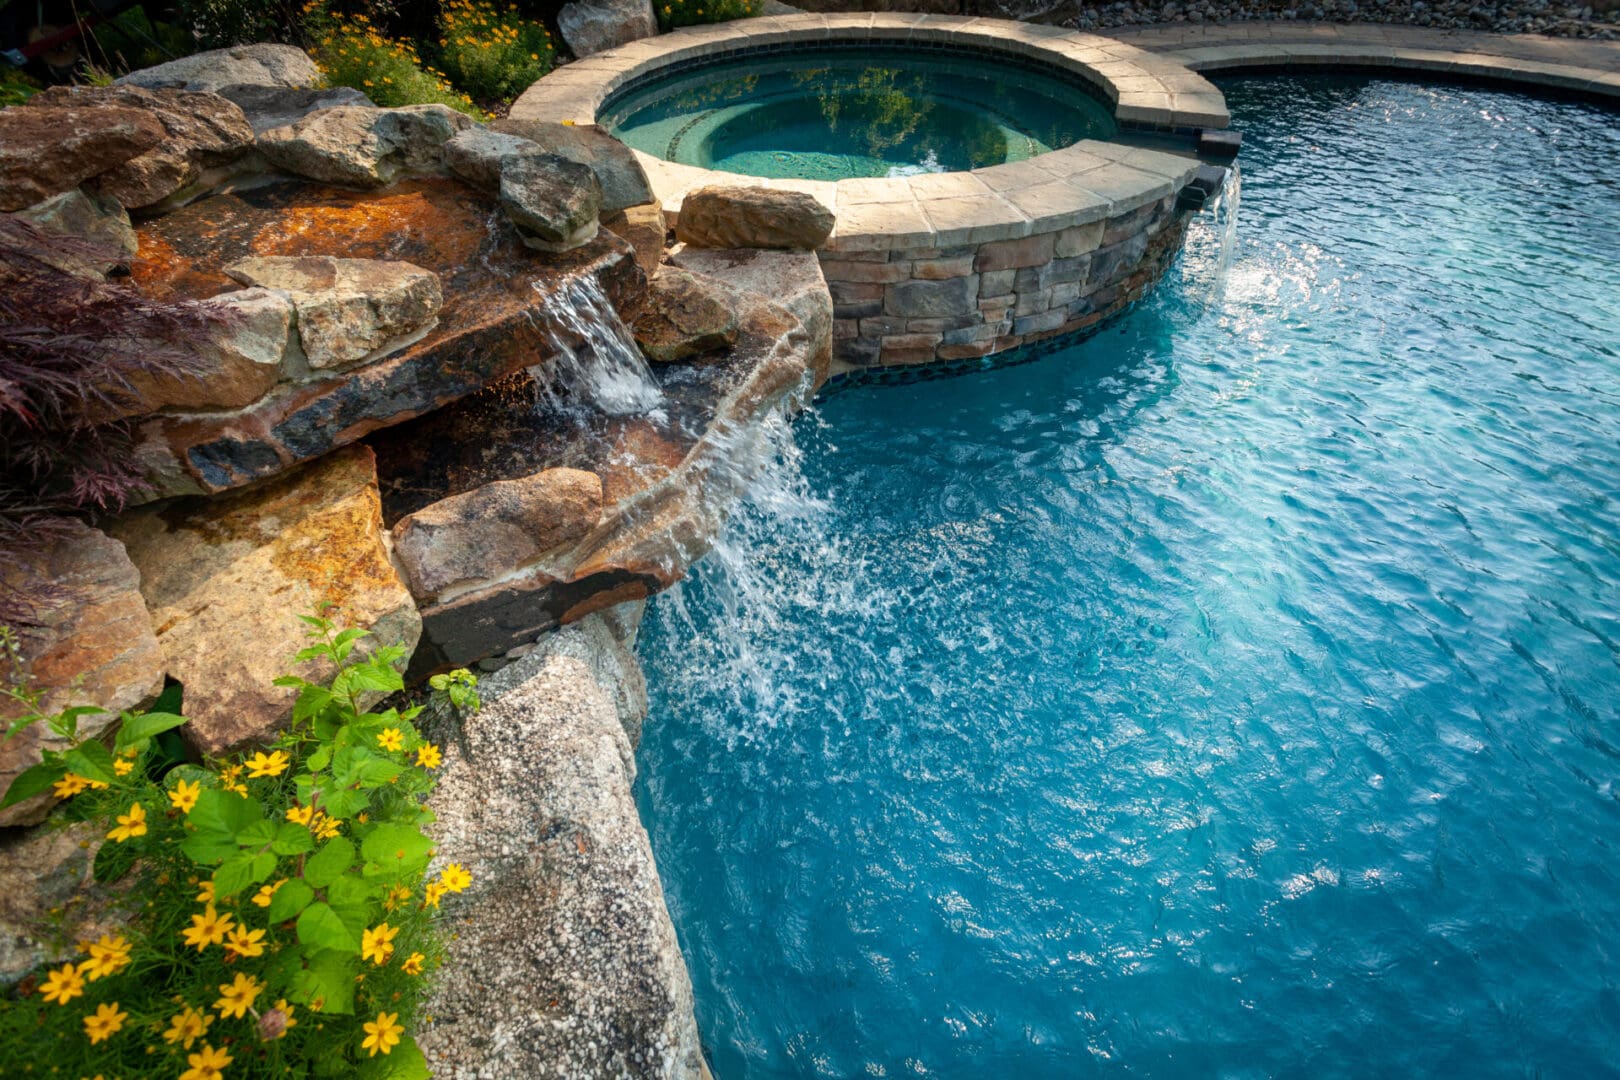 A pool with water features, including a waterfall and rocks.